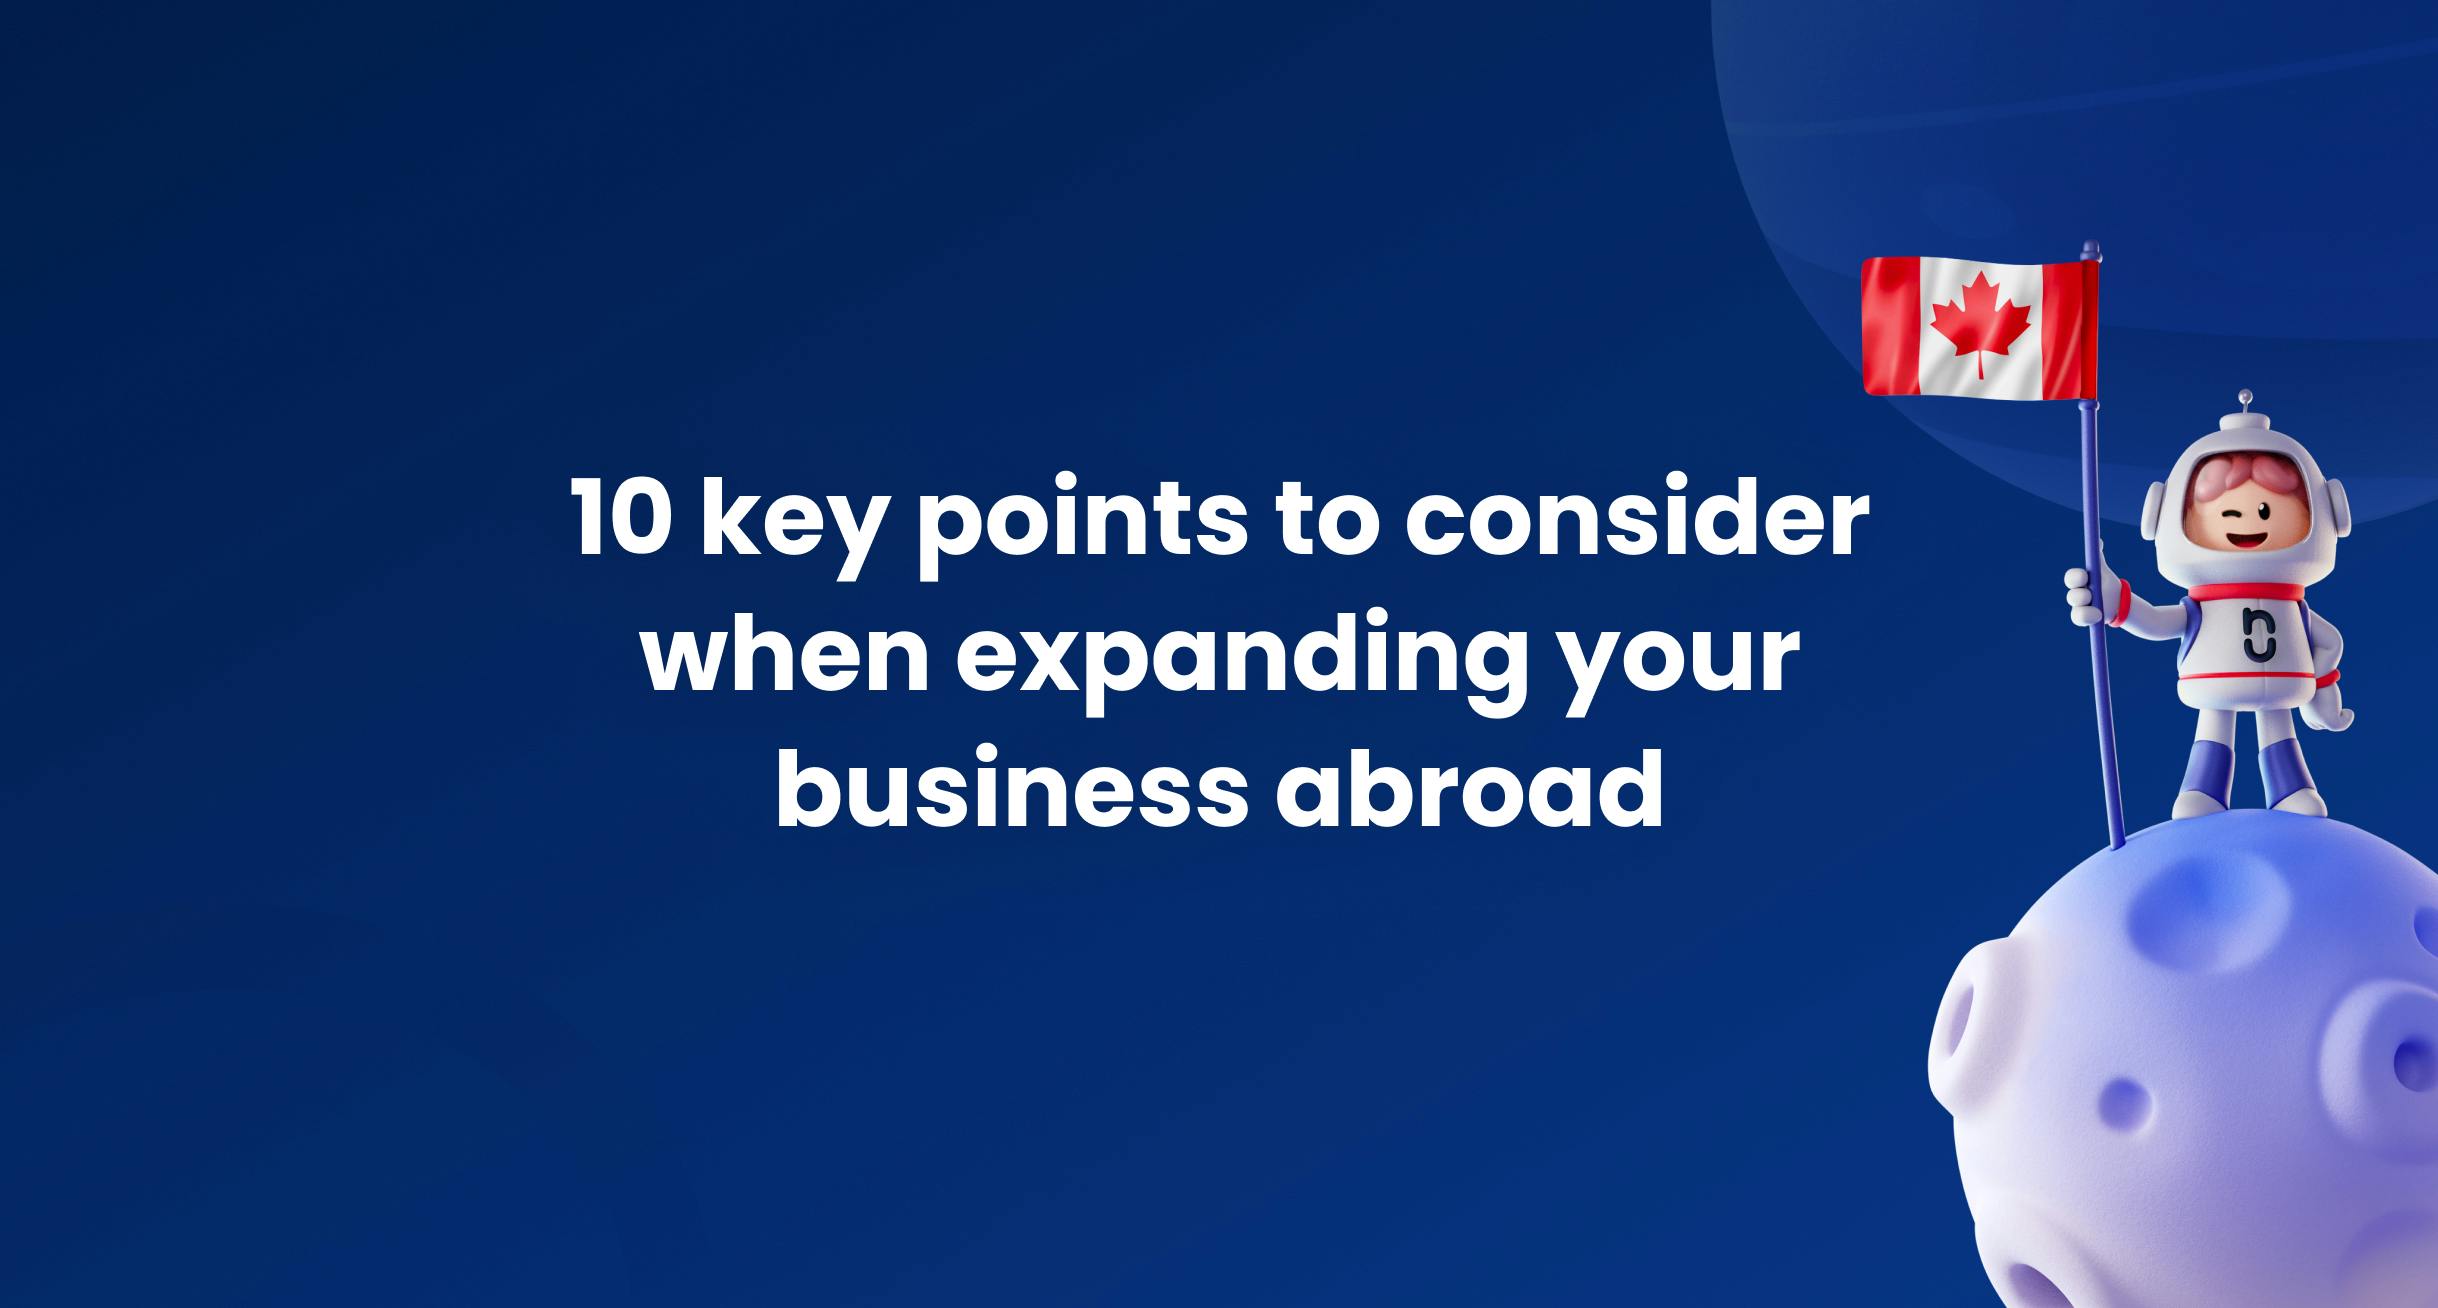 Nightborn - 10 key points to consider when expanding your business abroad